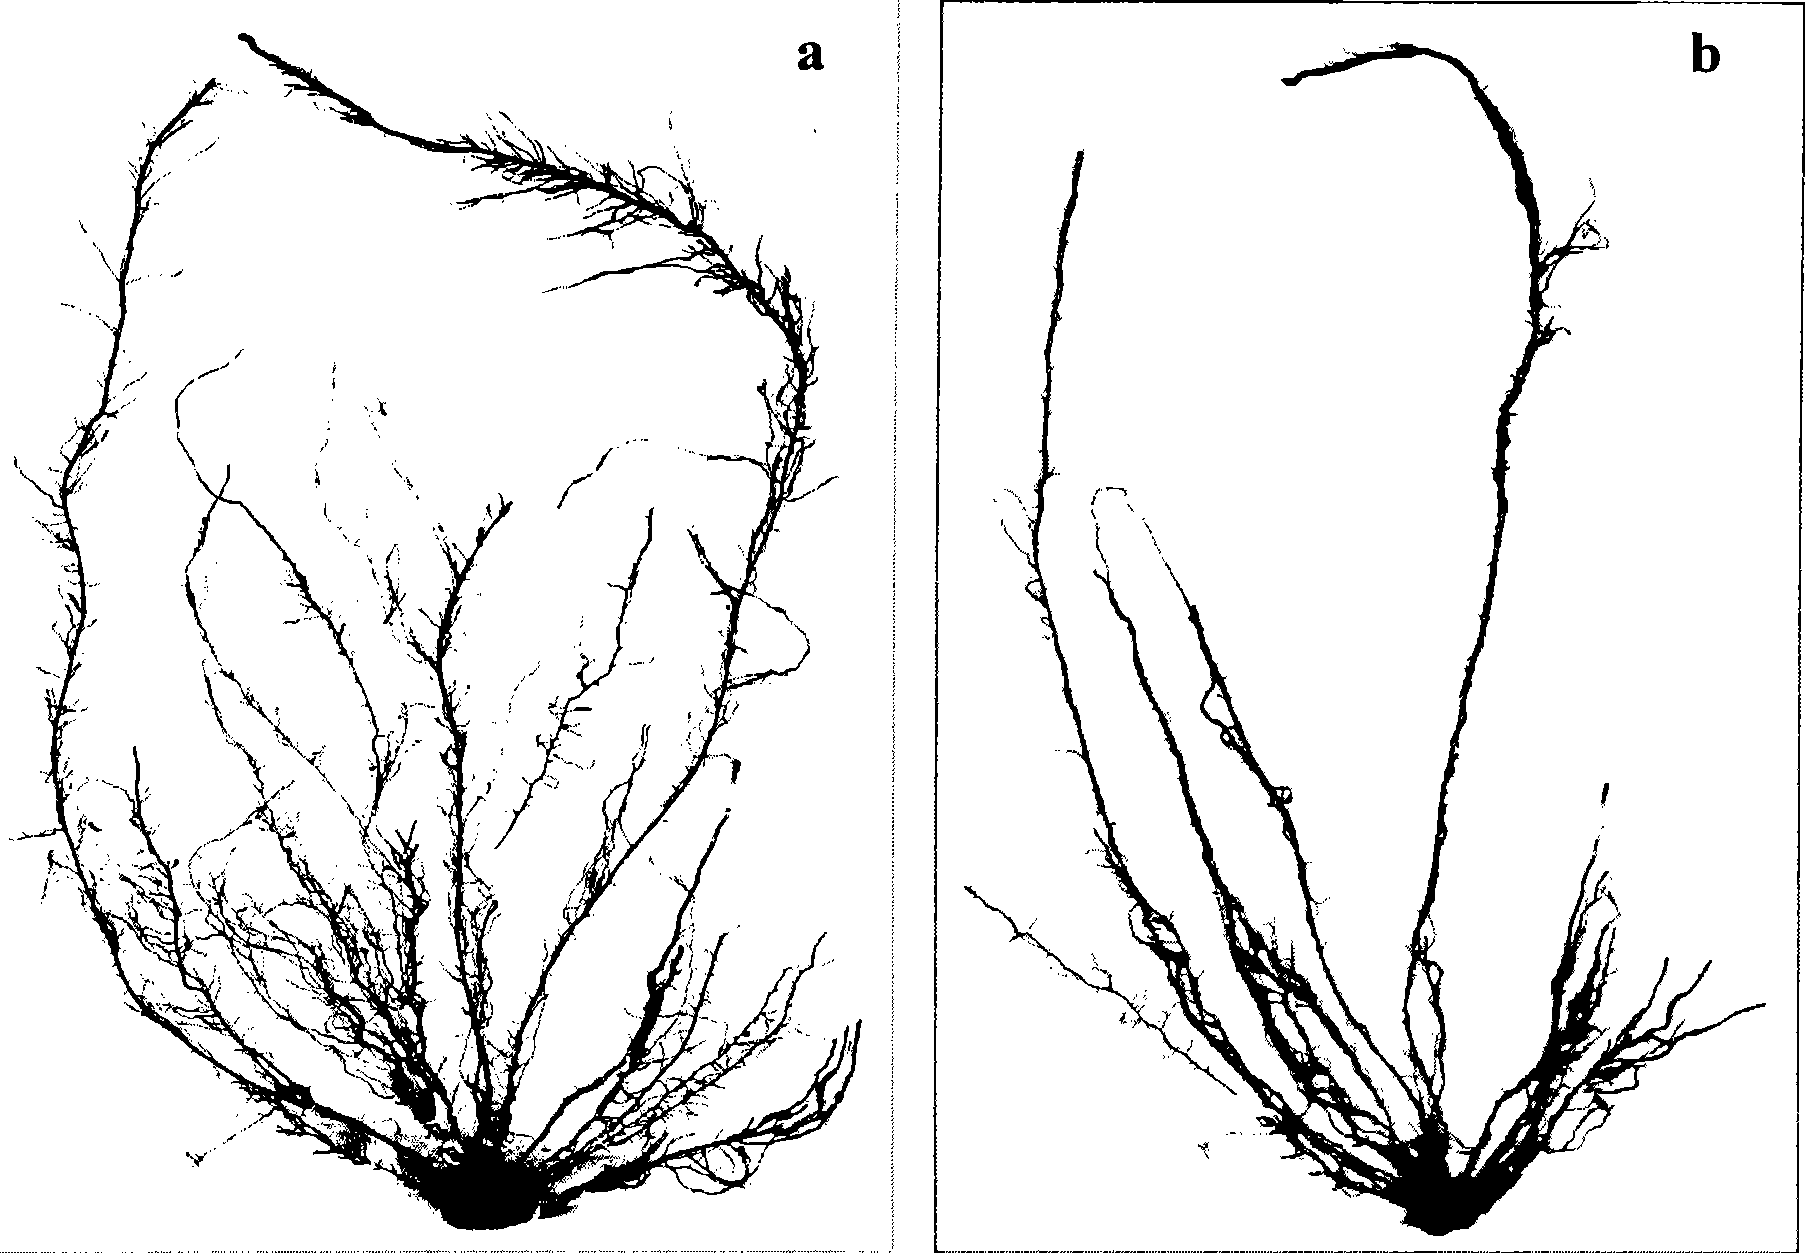 Method for scanning morpha structure of plant fibrous root systems